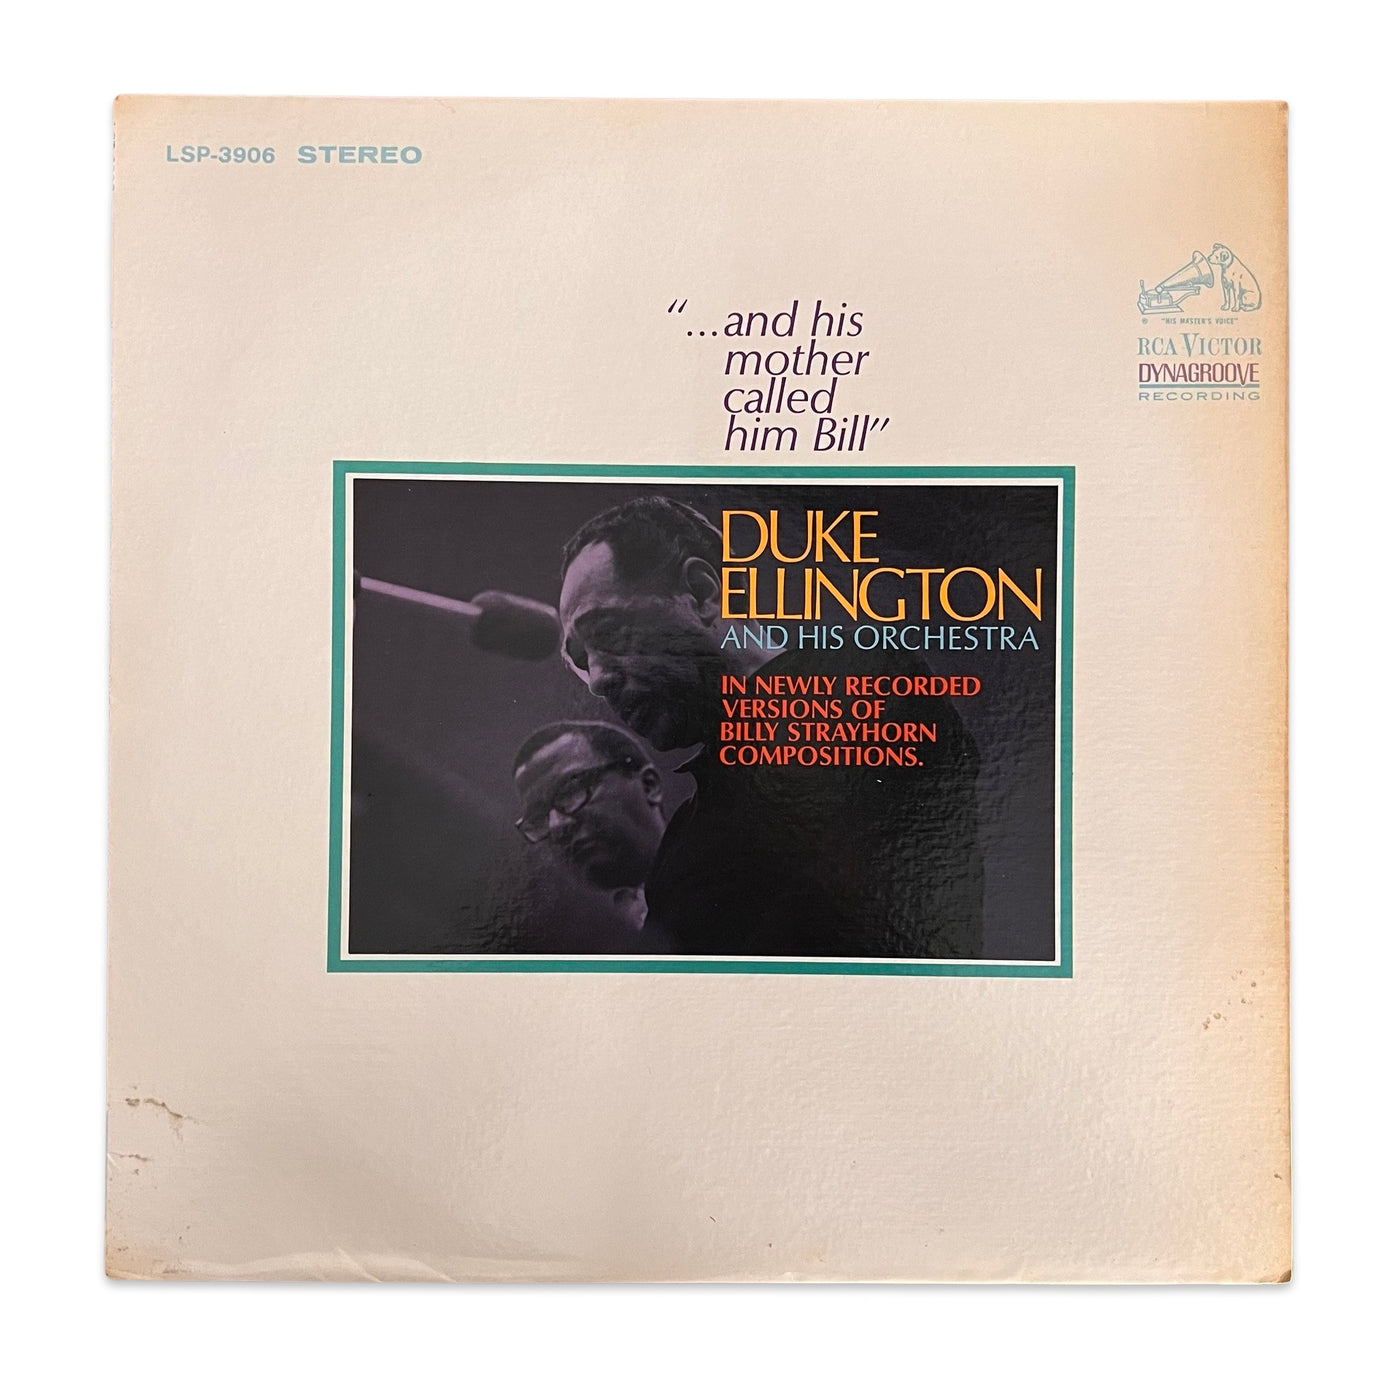 Duke Ellington And His Orchestra – "...And His Mother Called Him Bill" (1968, Vinyl)